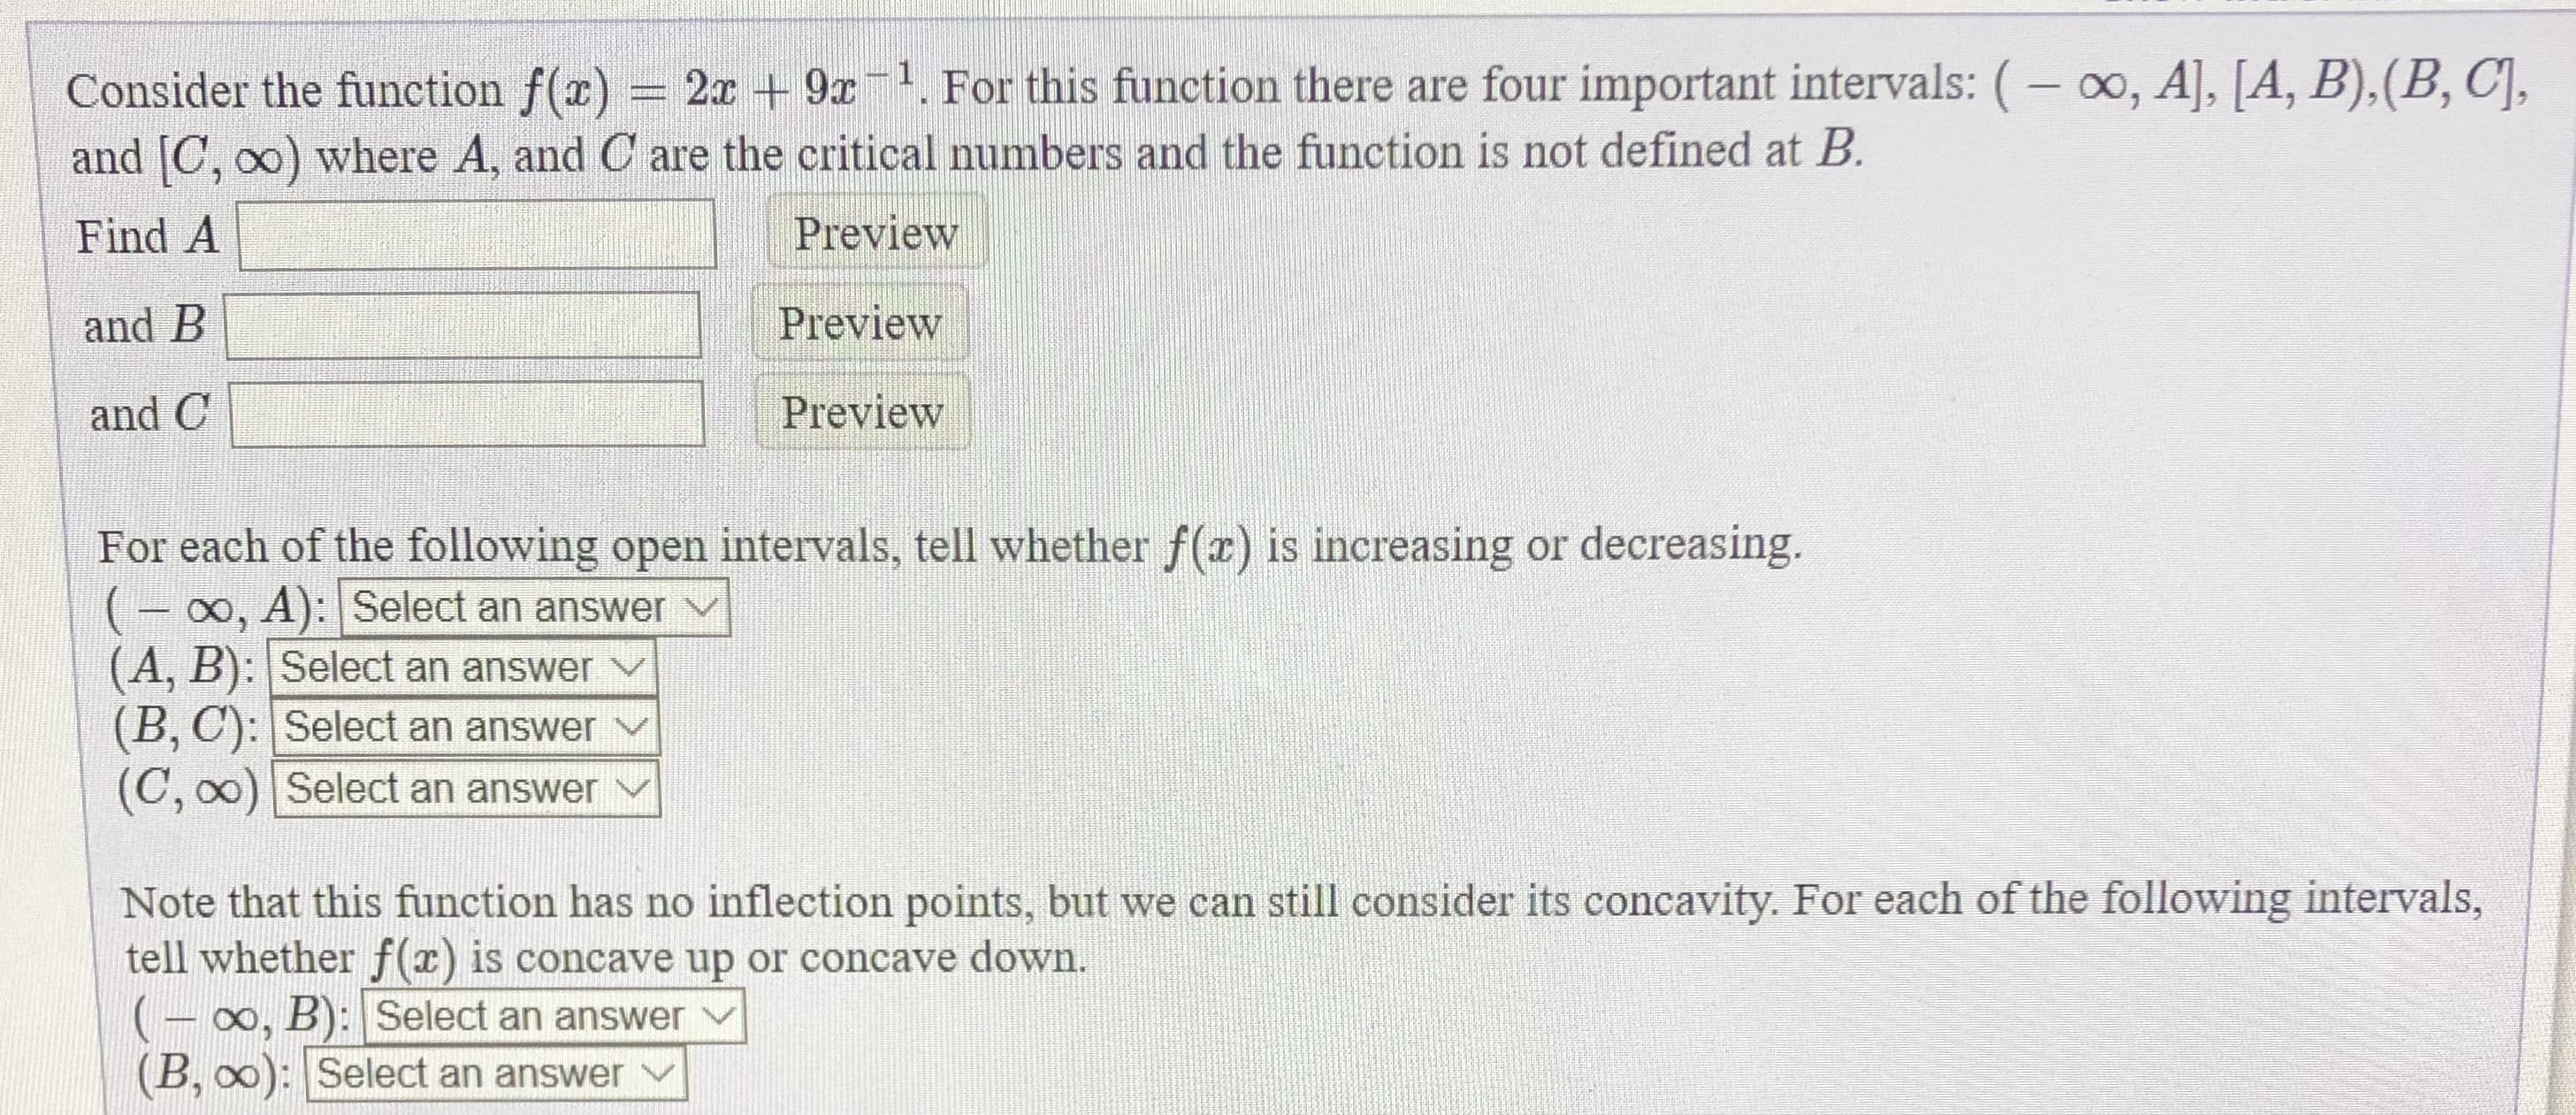 Consider the function f(x) = 2a + 9x For this function there are four important intervals: (– 0, A], [A, B).(B, C],
and [C, o0) where A, and C are the critical numbers and the function is not defined at B.
Preview
Find A
and B
Preview
and C
Preview
